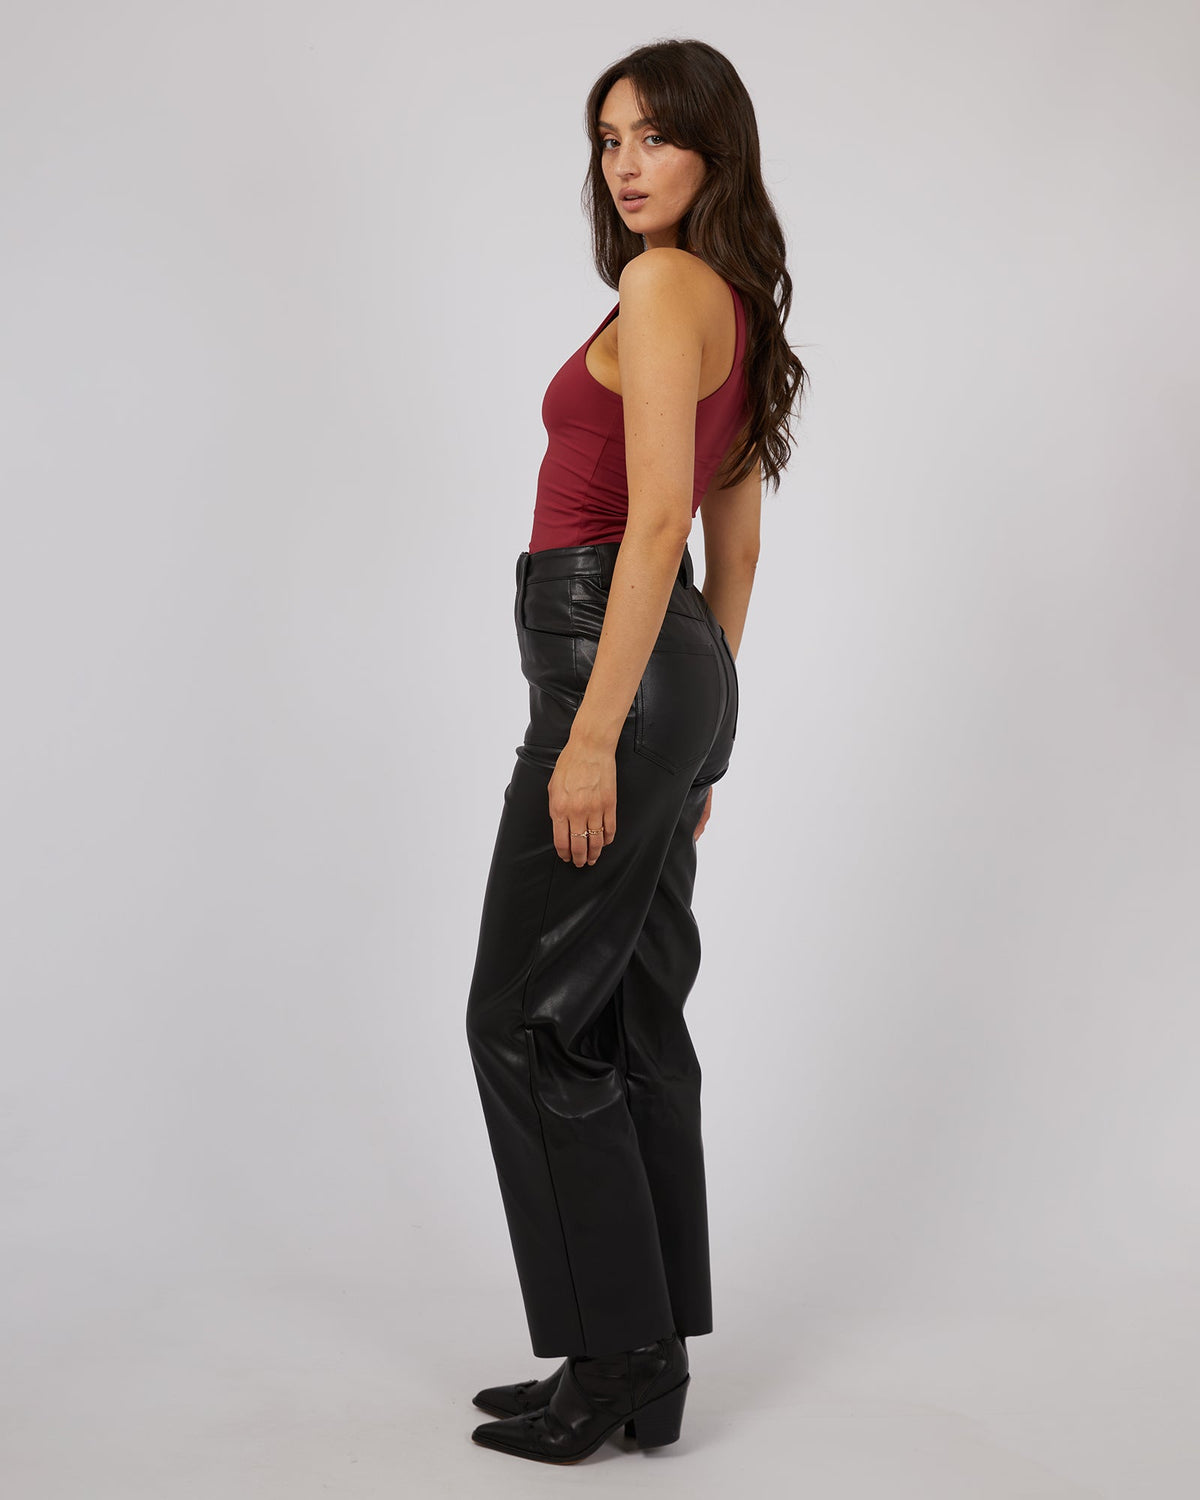 All About Eve-Eve Staple Bodysuit Port-Edge Clothing